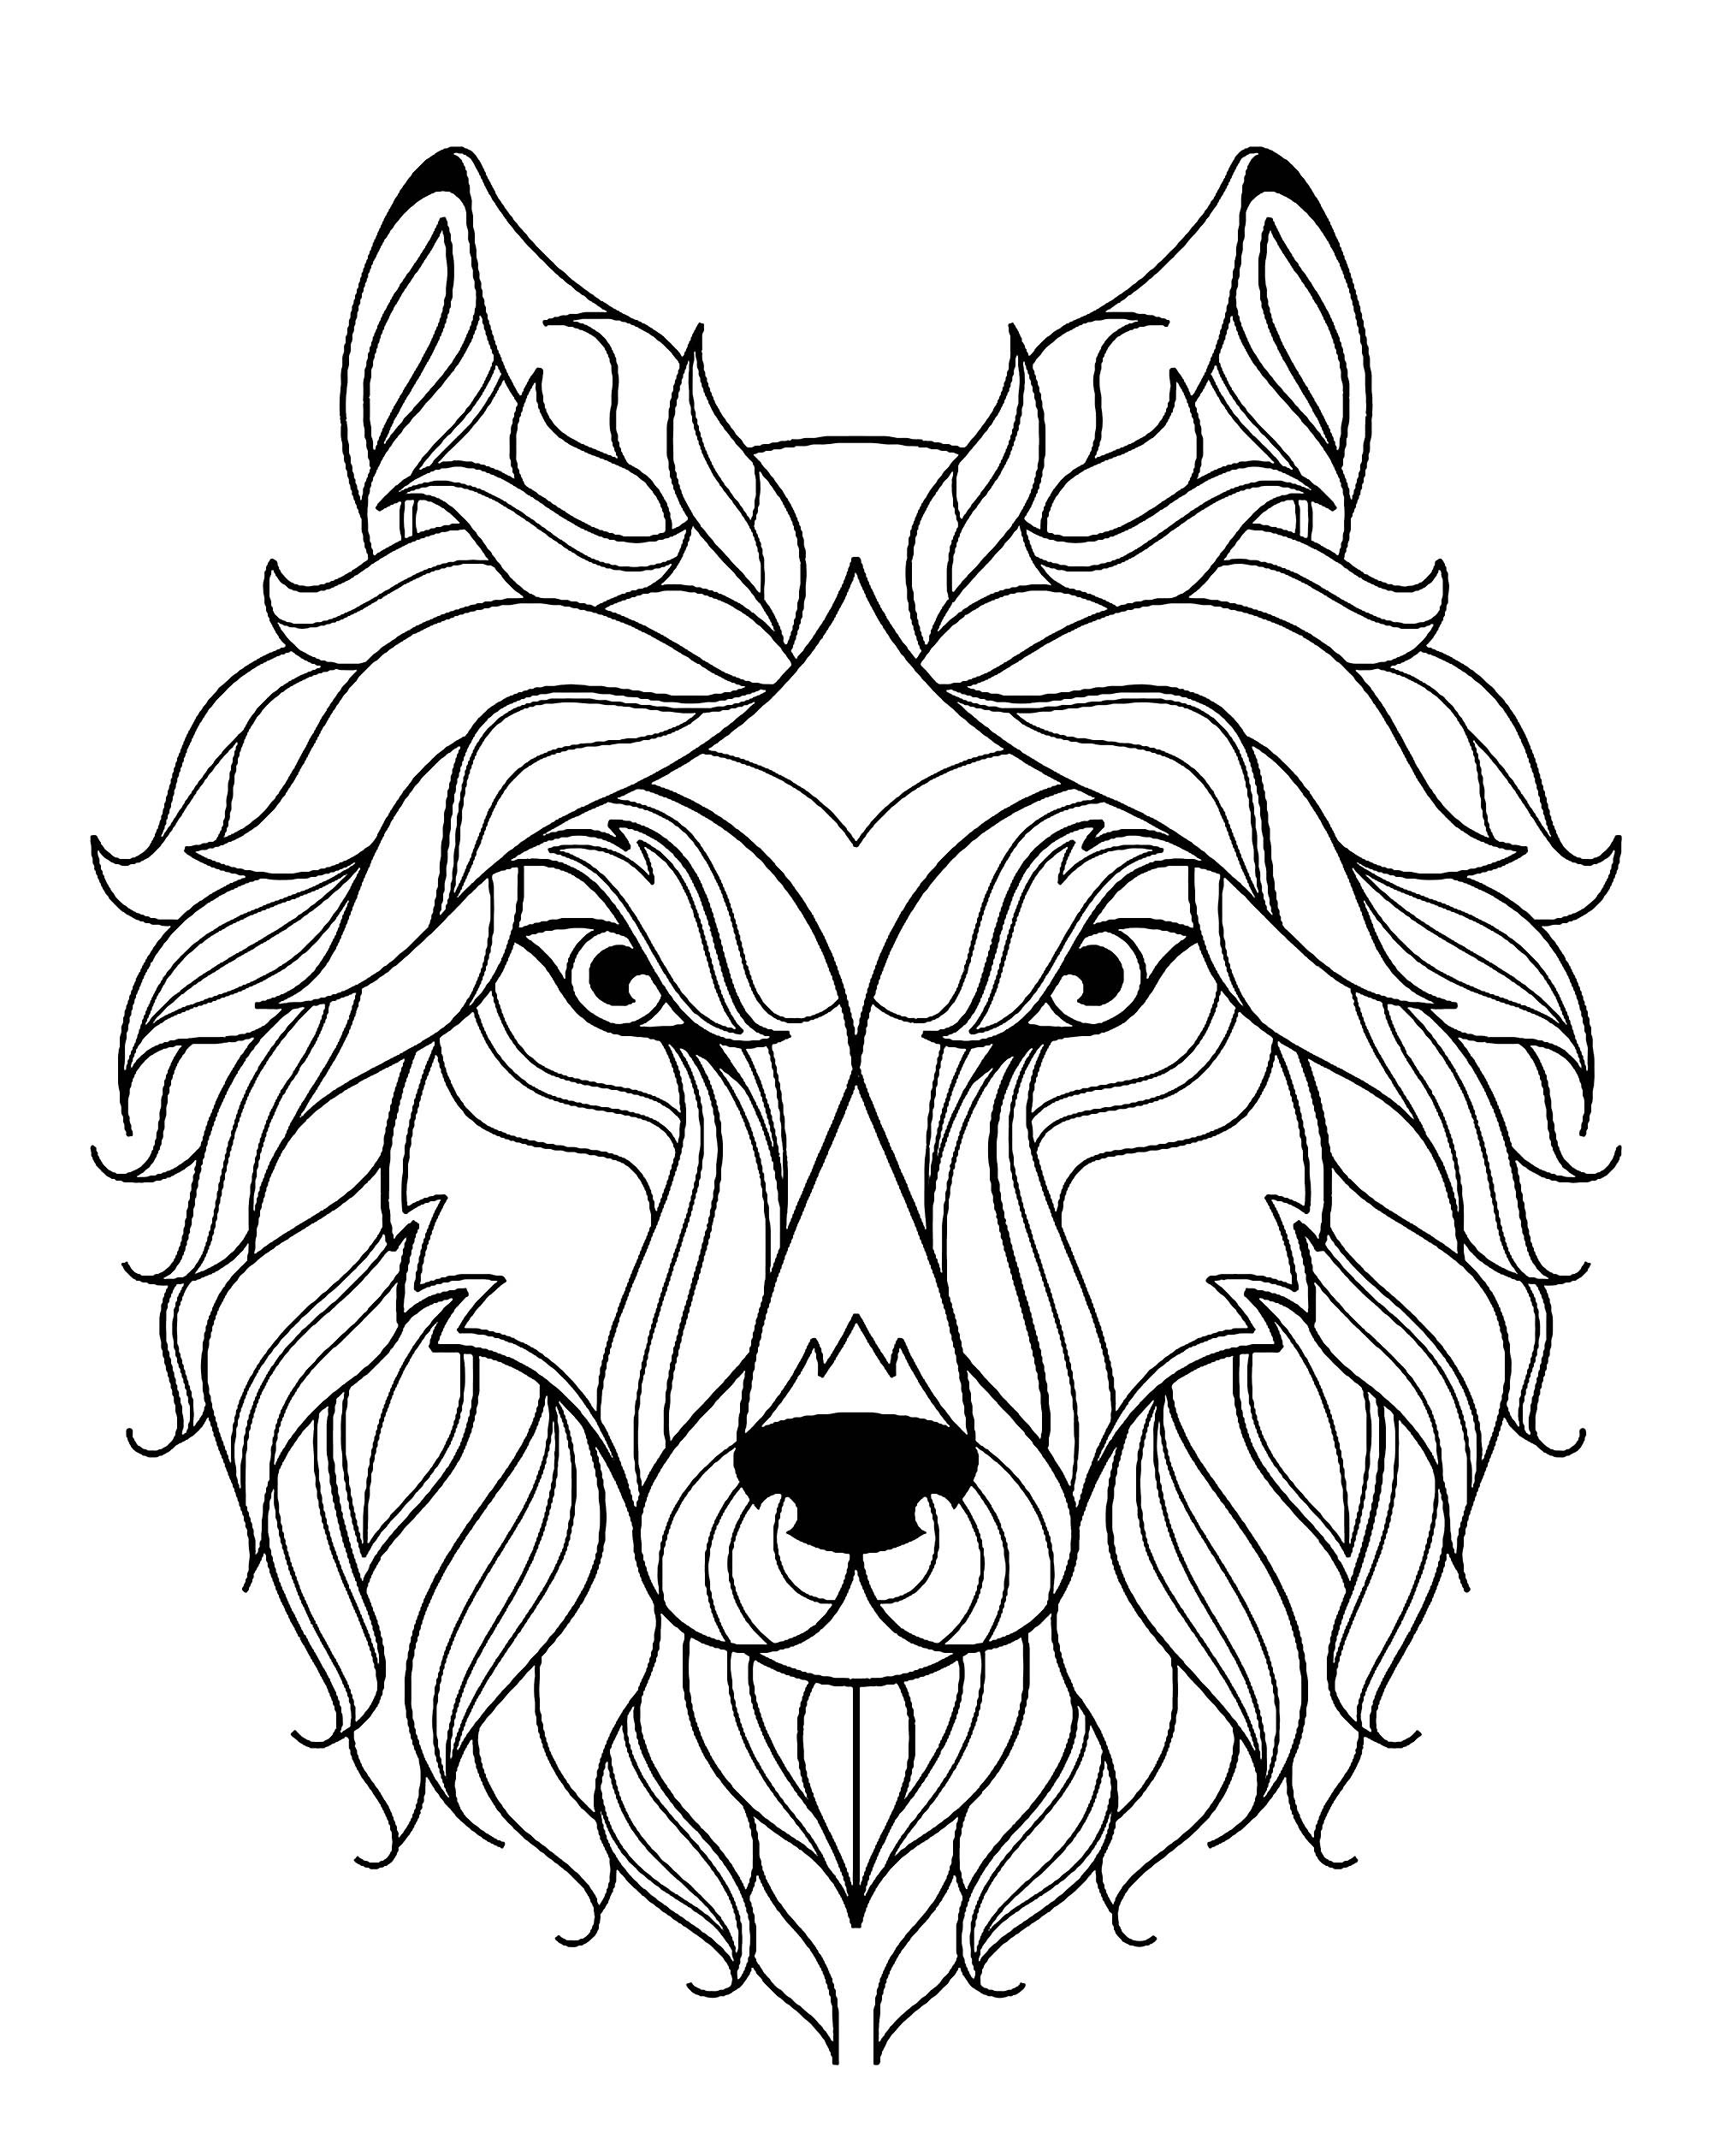 Coloring Pages For Adults Wolf
 Big wolf head simple Wolves Adult Coloring Pages